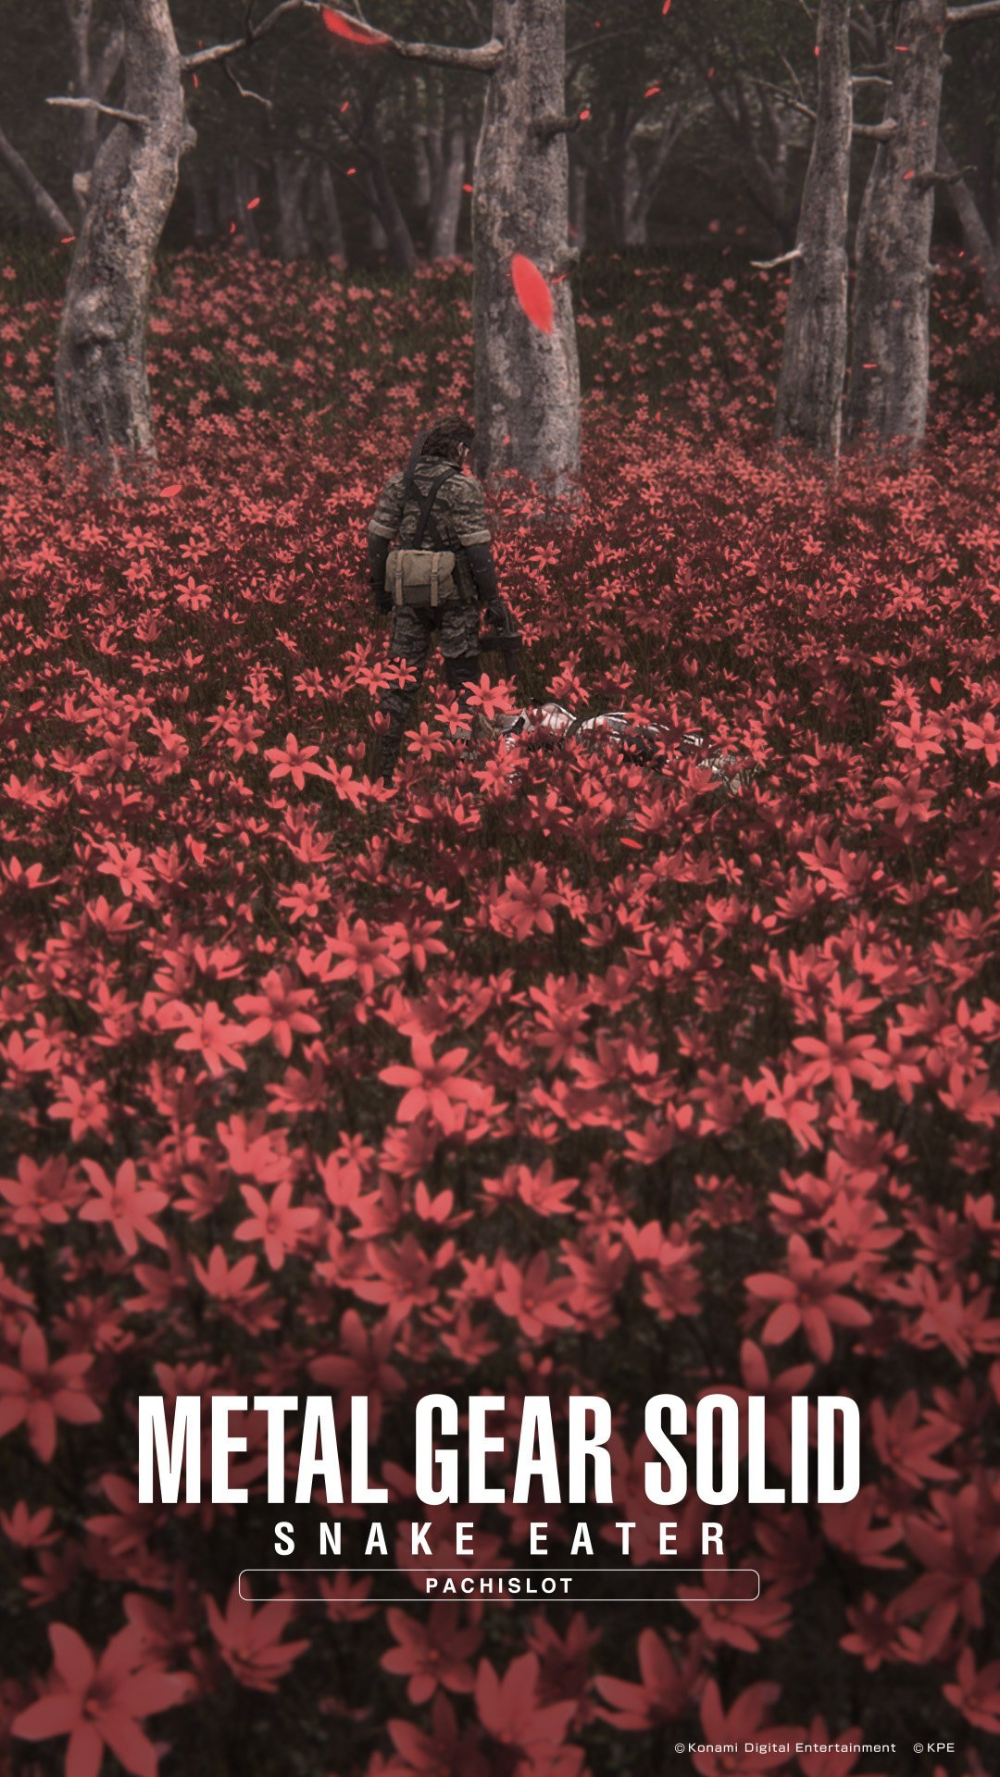 New Mgs3 Pachislot Wallpaper Tweeted Out By Metal Gear Informer